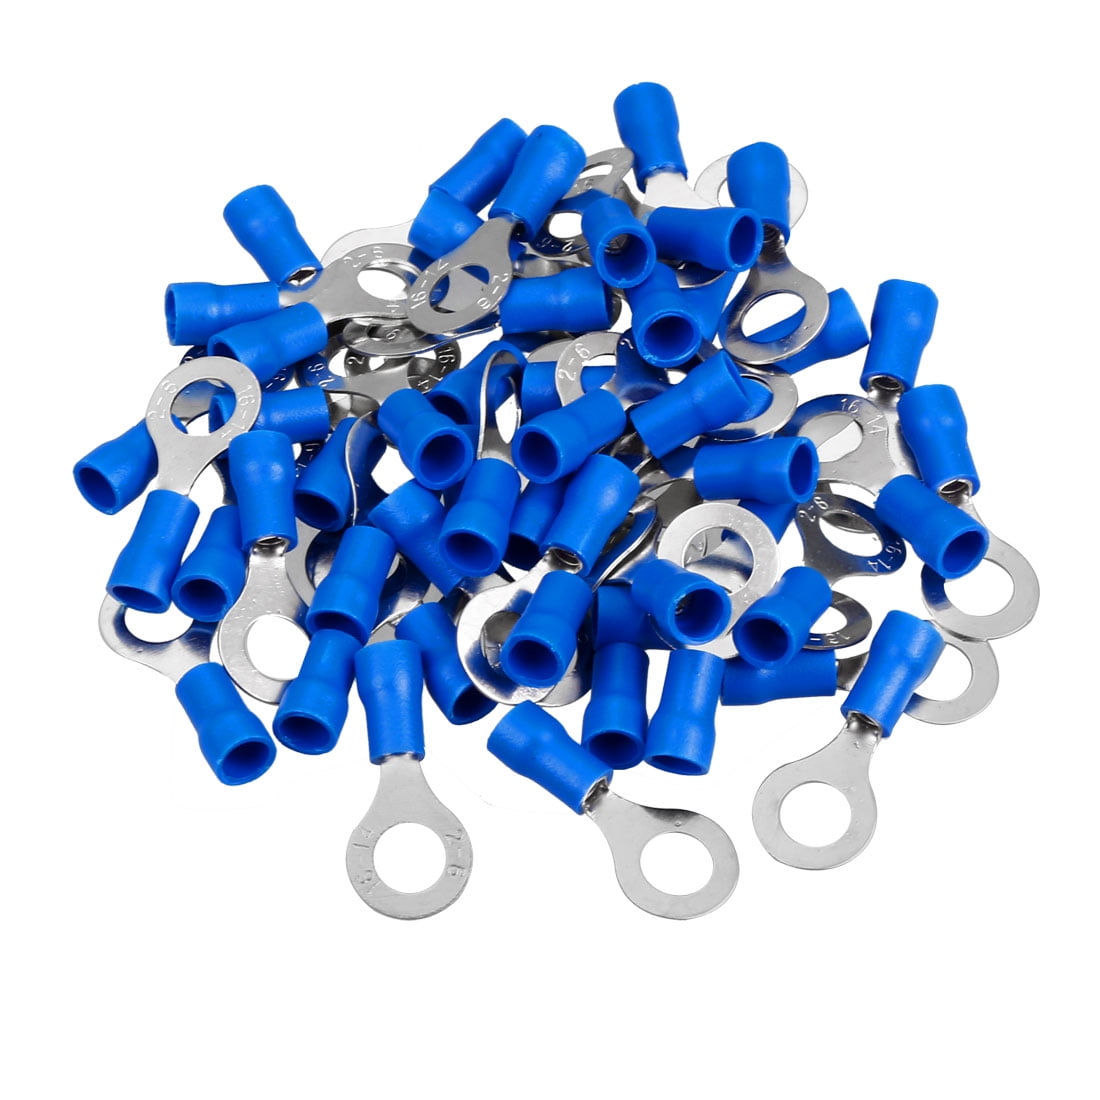 50pcs RV2-4S Pre Insulated Crimp Terminal Connector Blue for AWG 16-14 Wire 